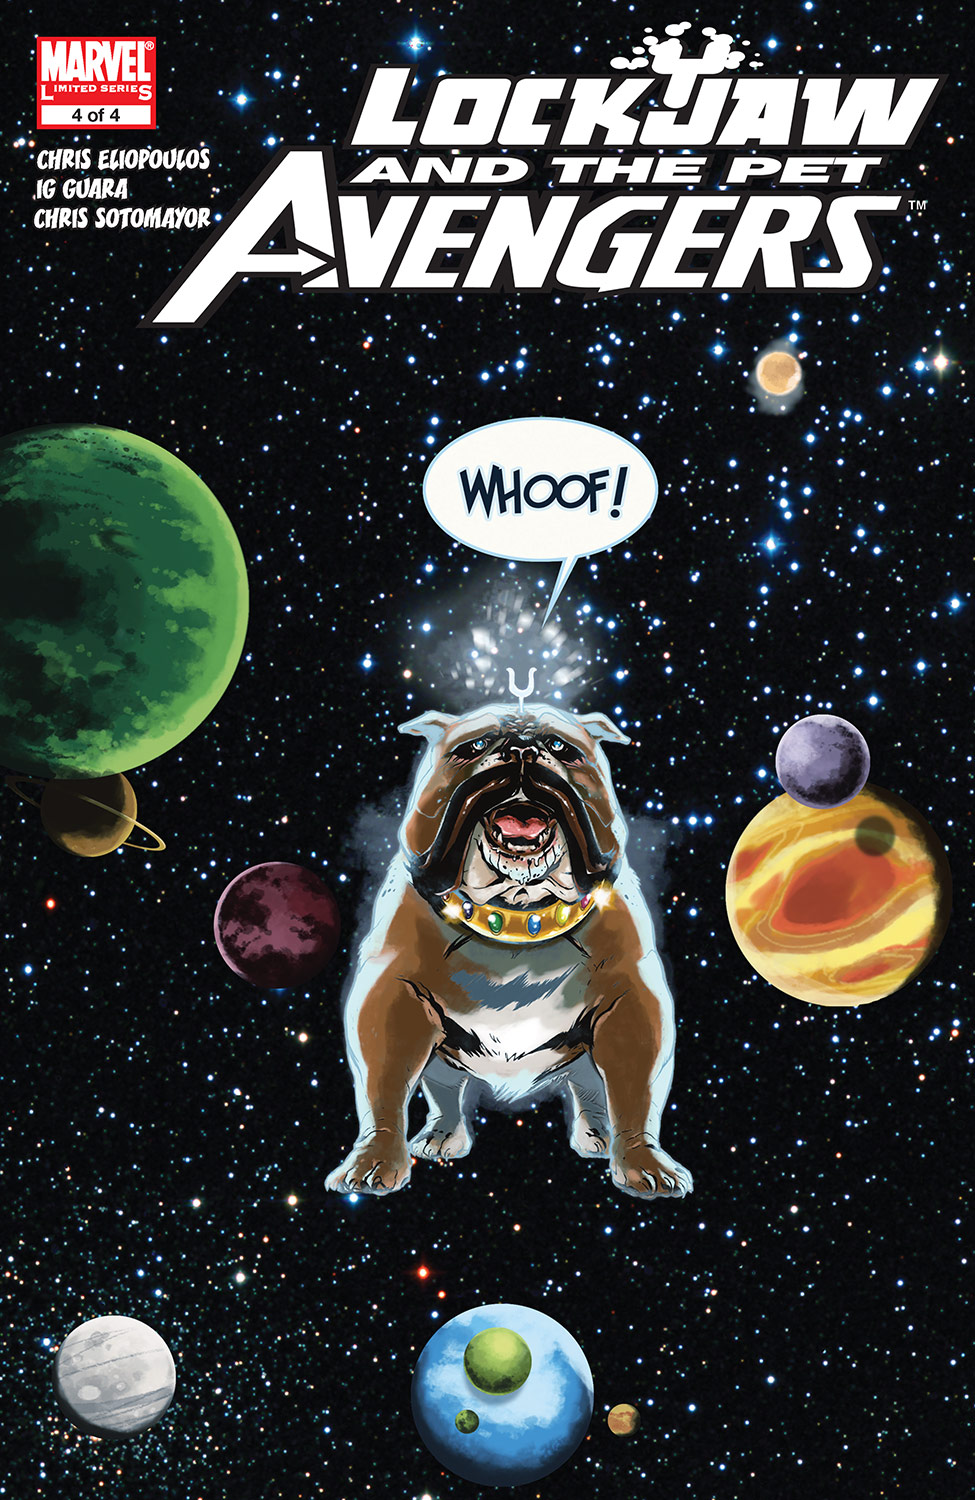 Lockjaw and the Pet Avengers (2009) #4